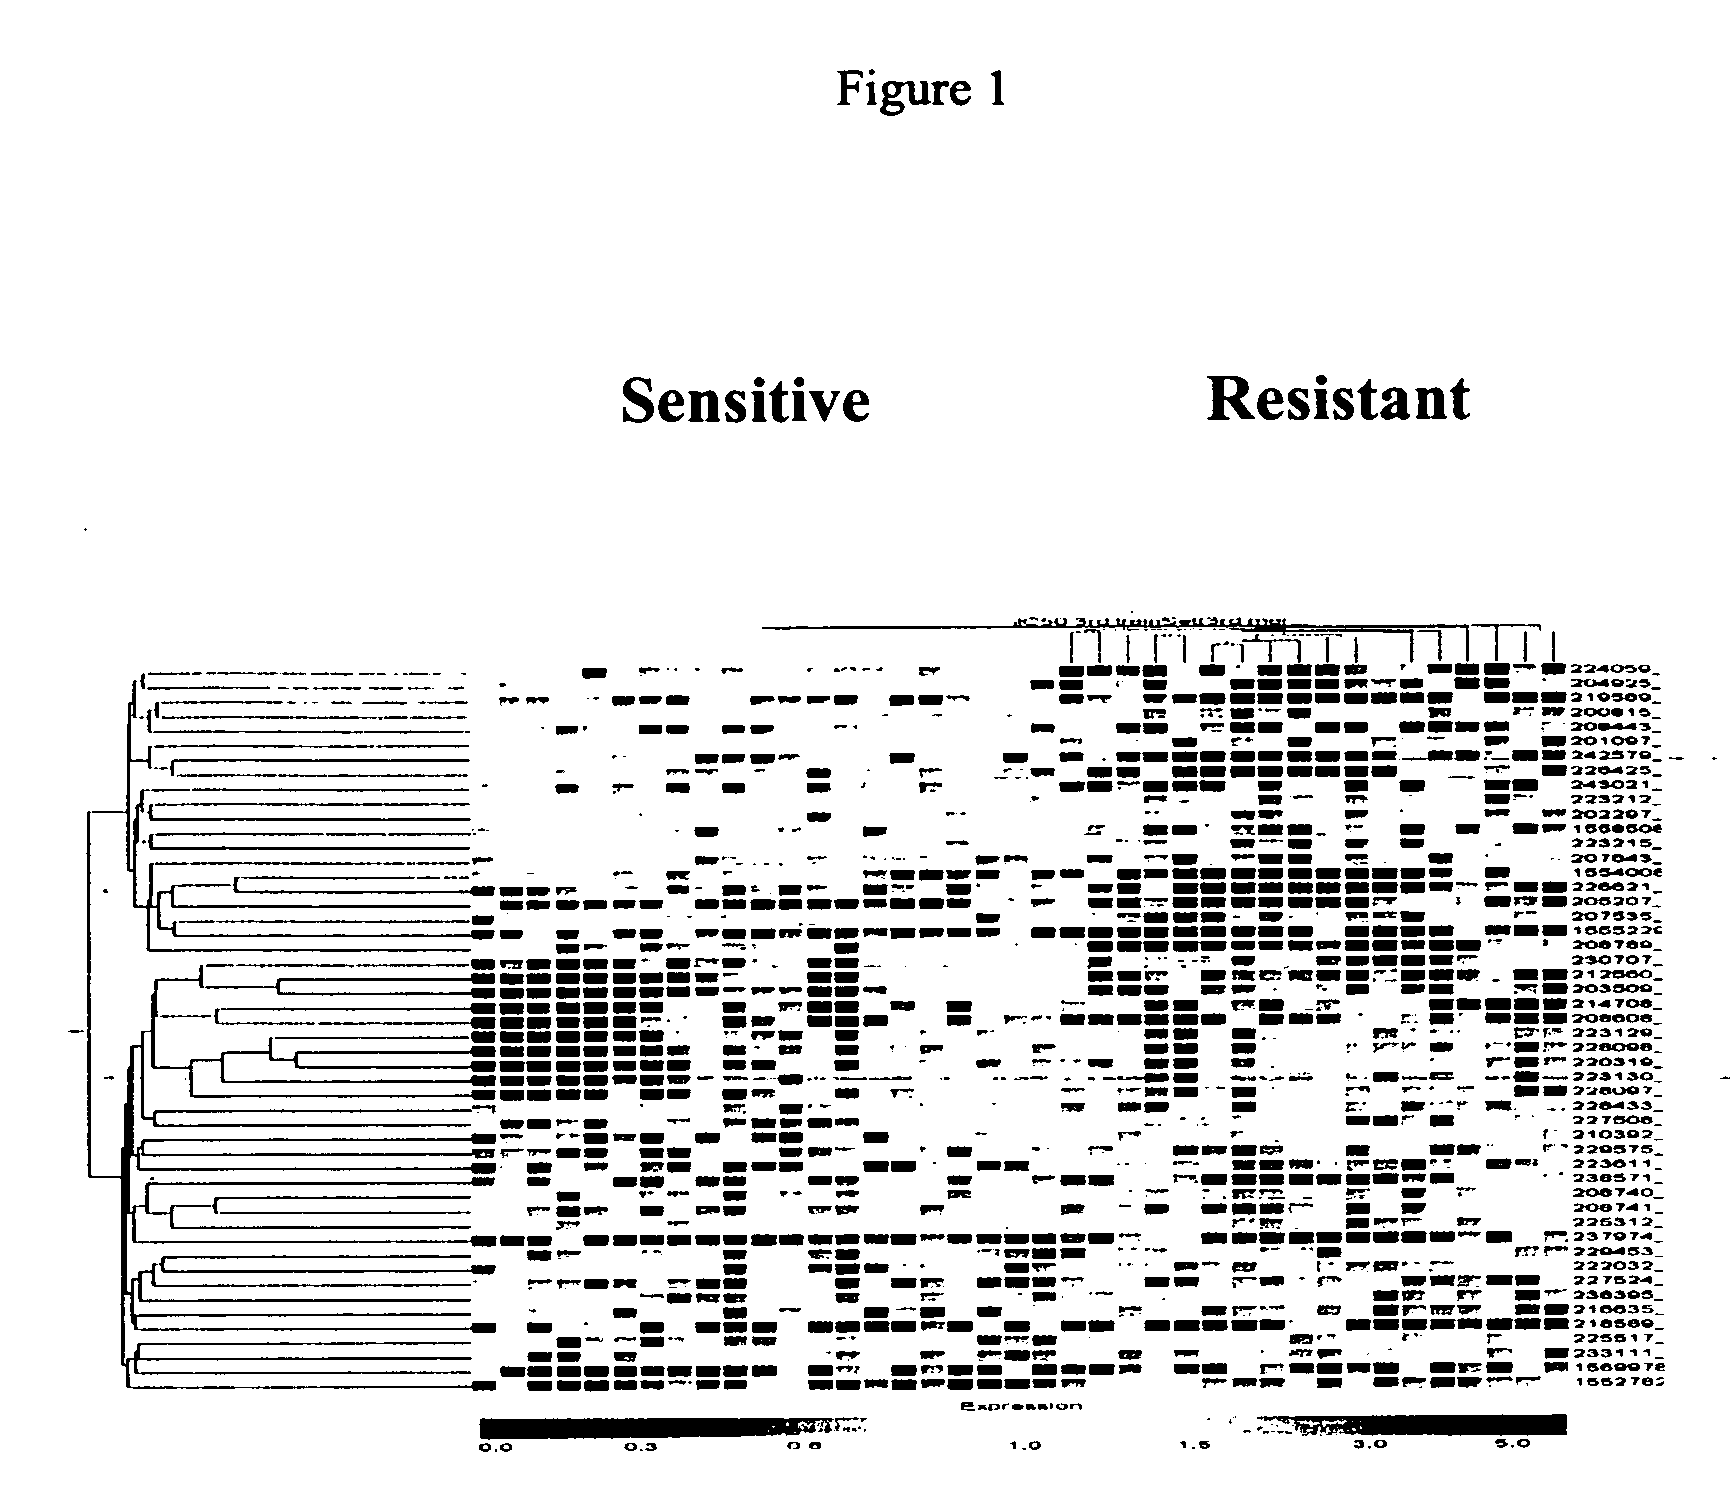 Transcriptome microarray technology and methods of using the same